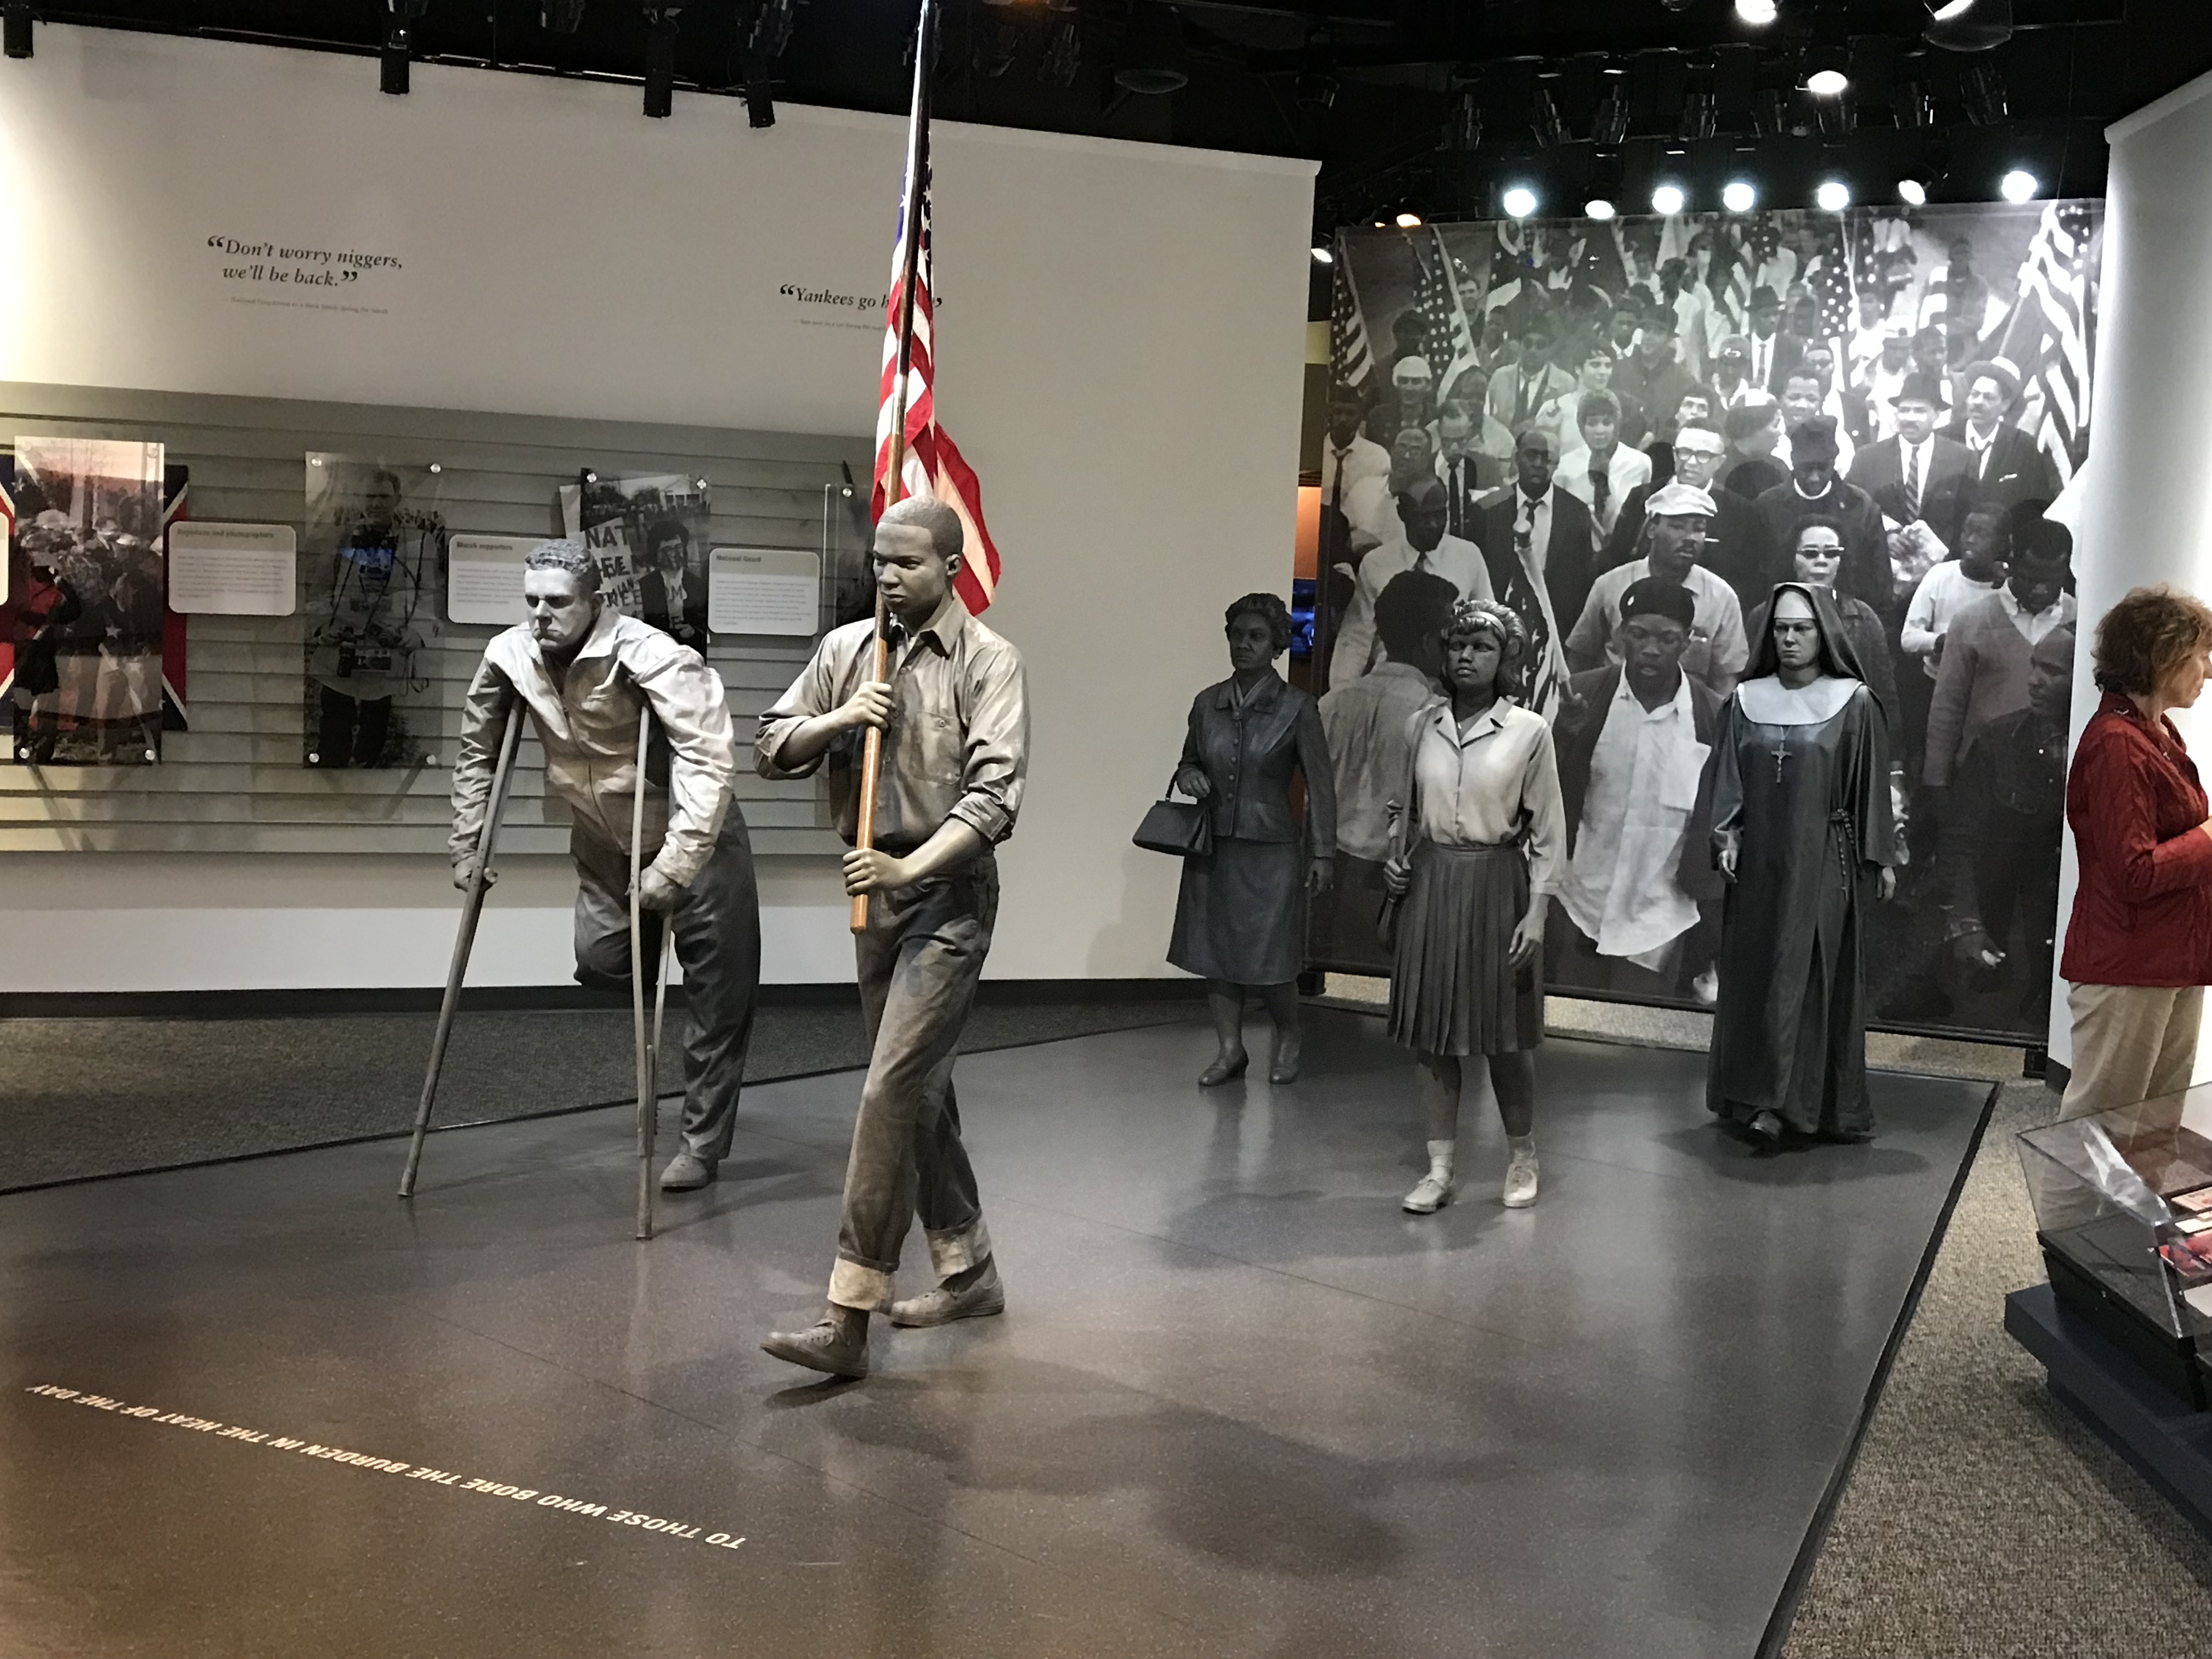 Inside the Lowndes Interpretive Center. Grey tone sculptures of men and women, one holding an American flag, in the center of the room, with images and text on the walls. 